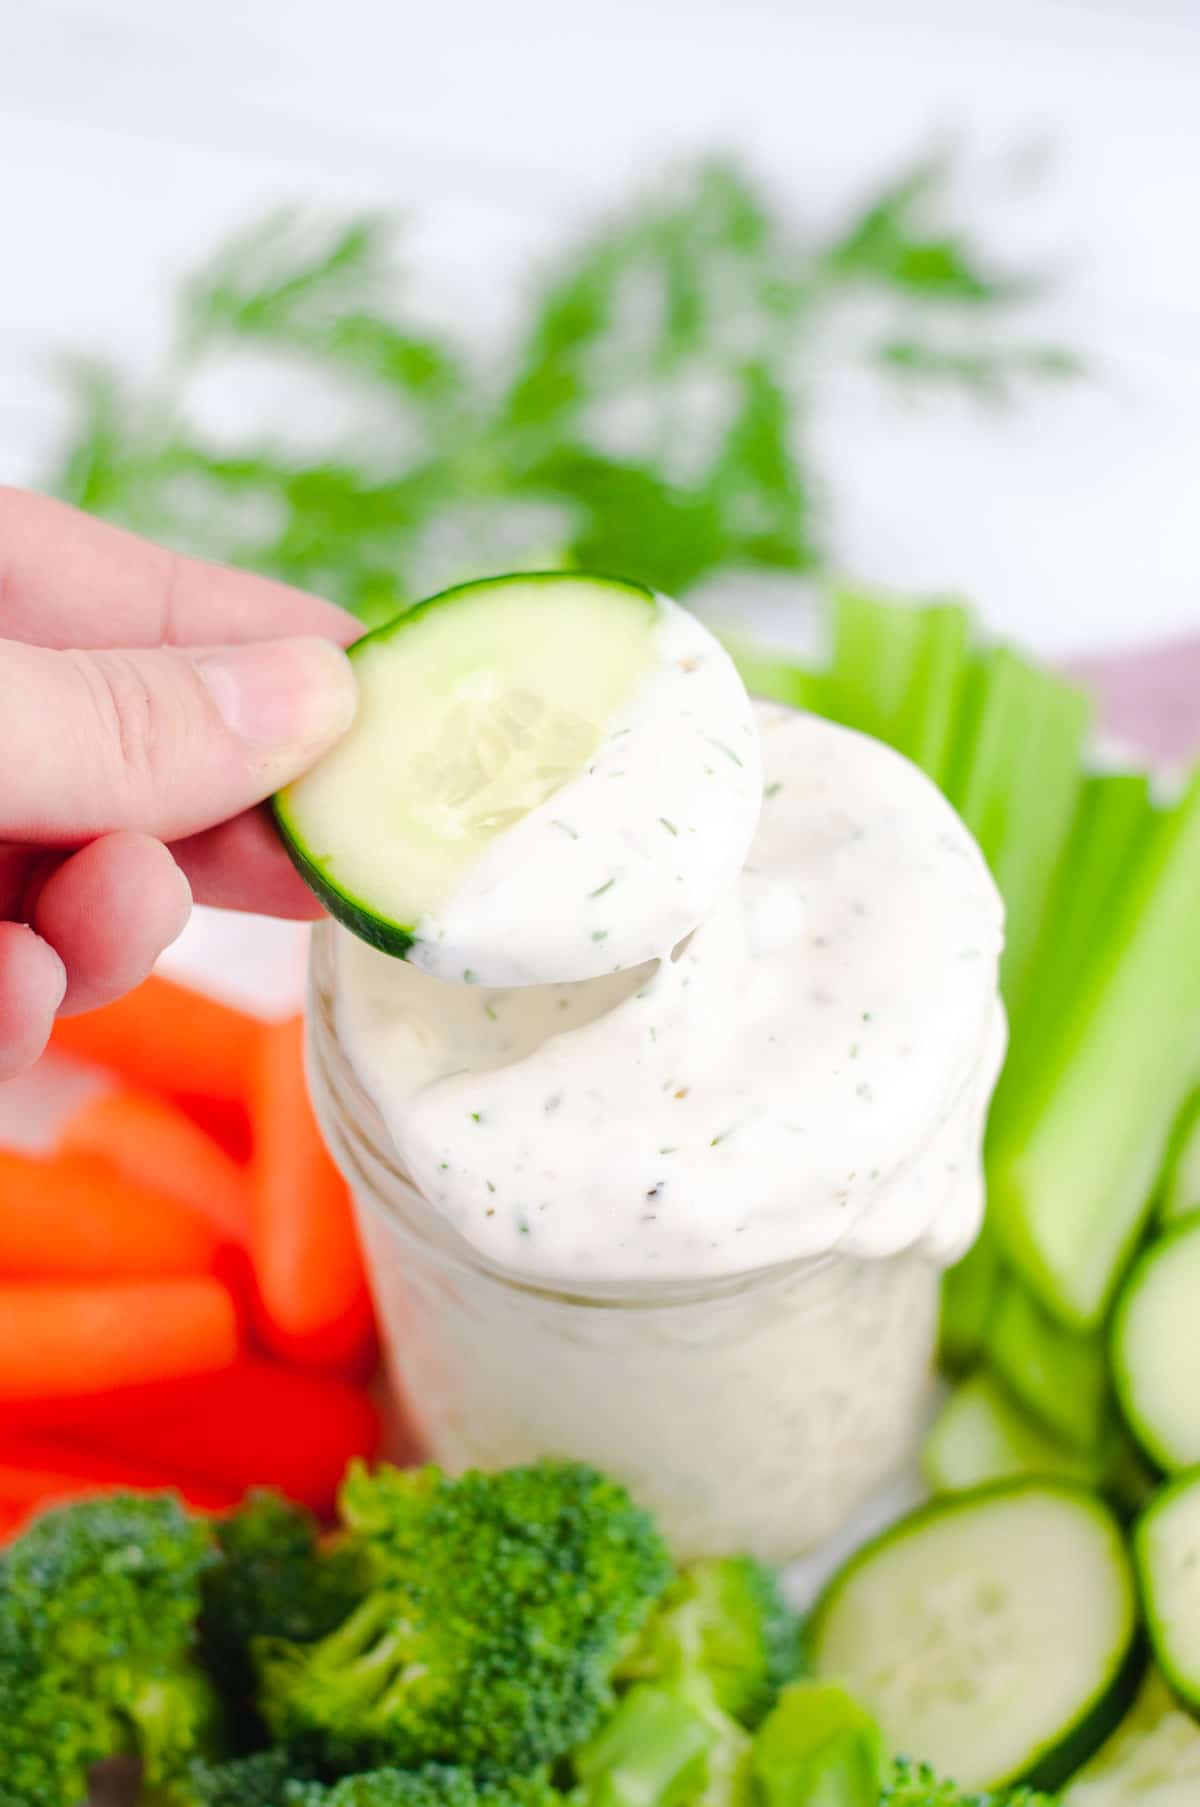 Slice of cucumber being lifted out of jar of vegan ranch dressing.